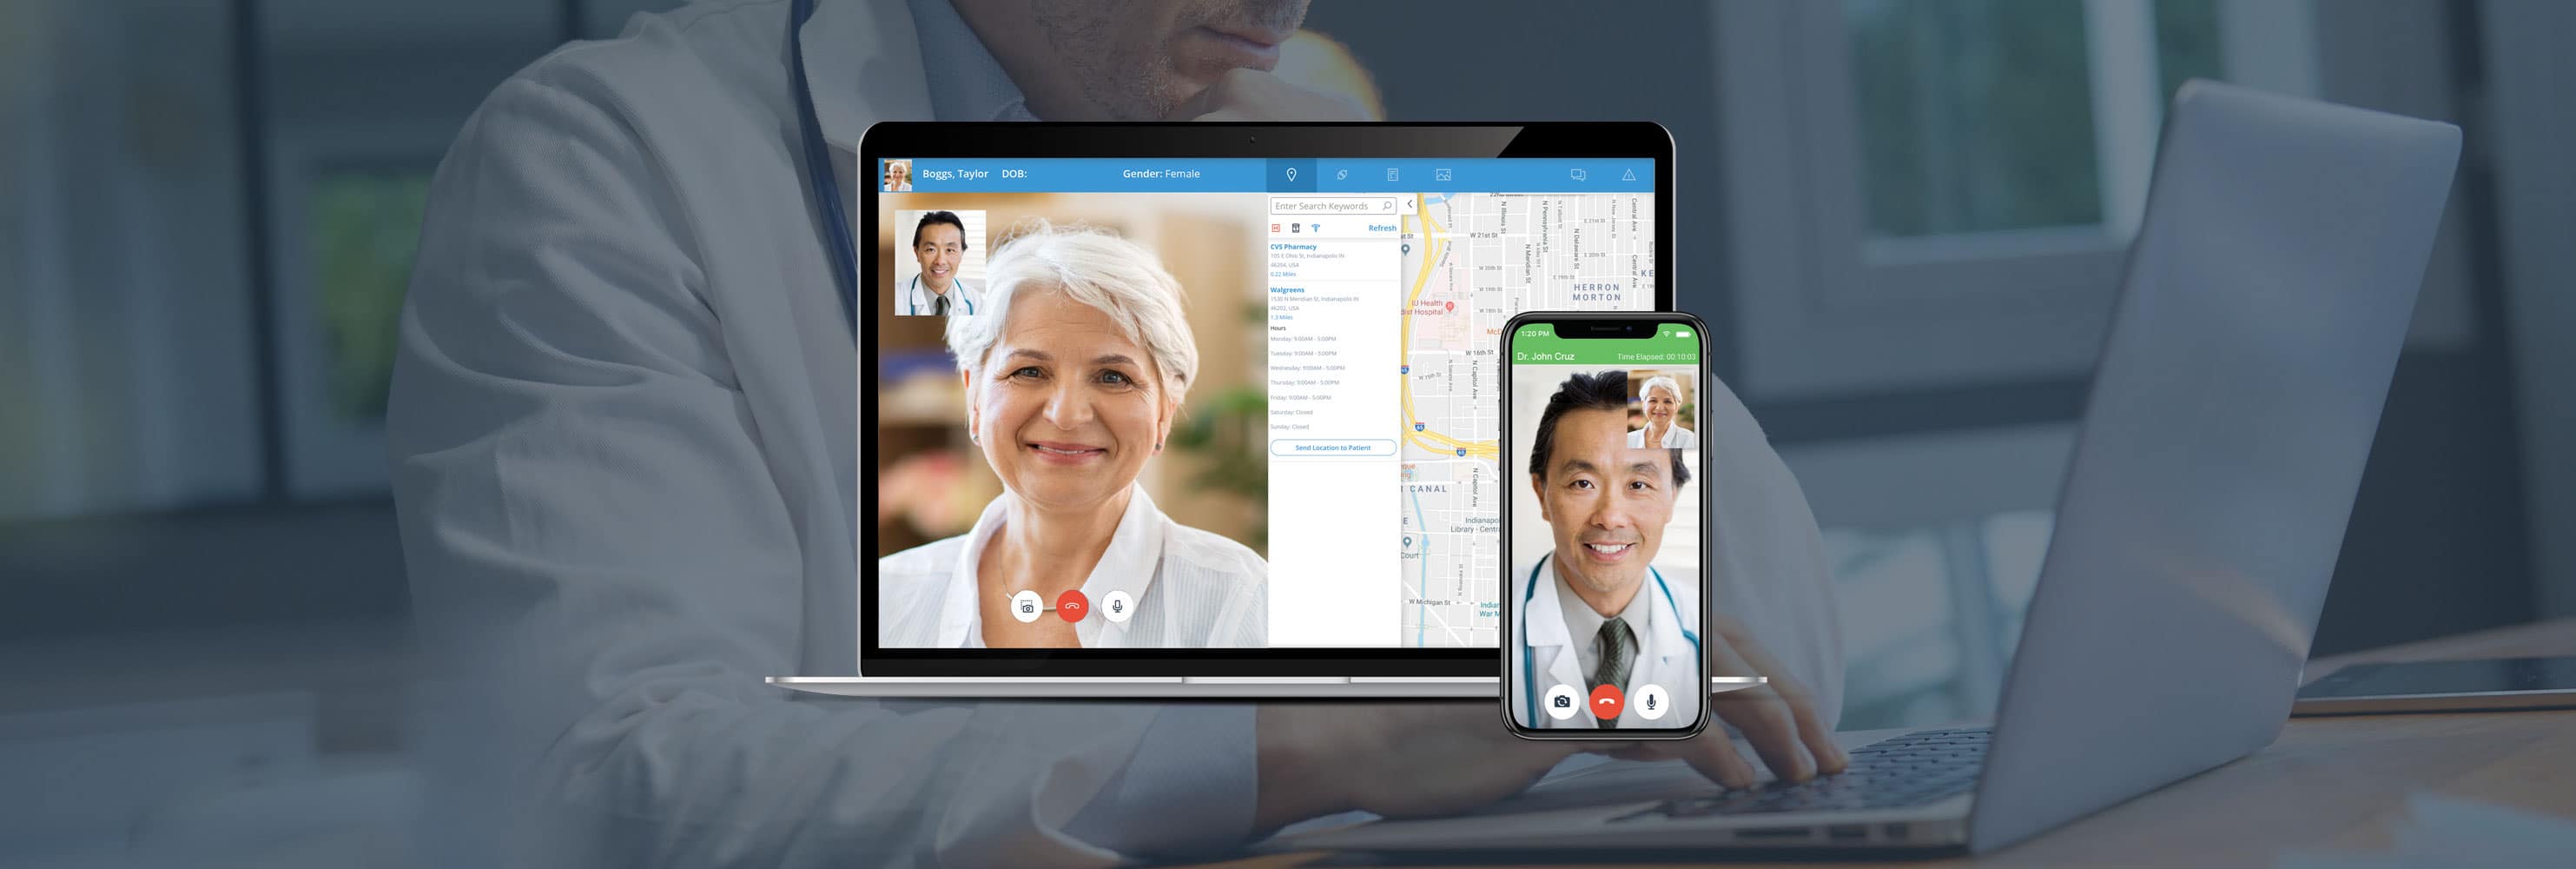 How Telehealth Can Improve Access to Care in 2021